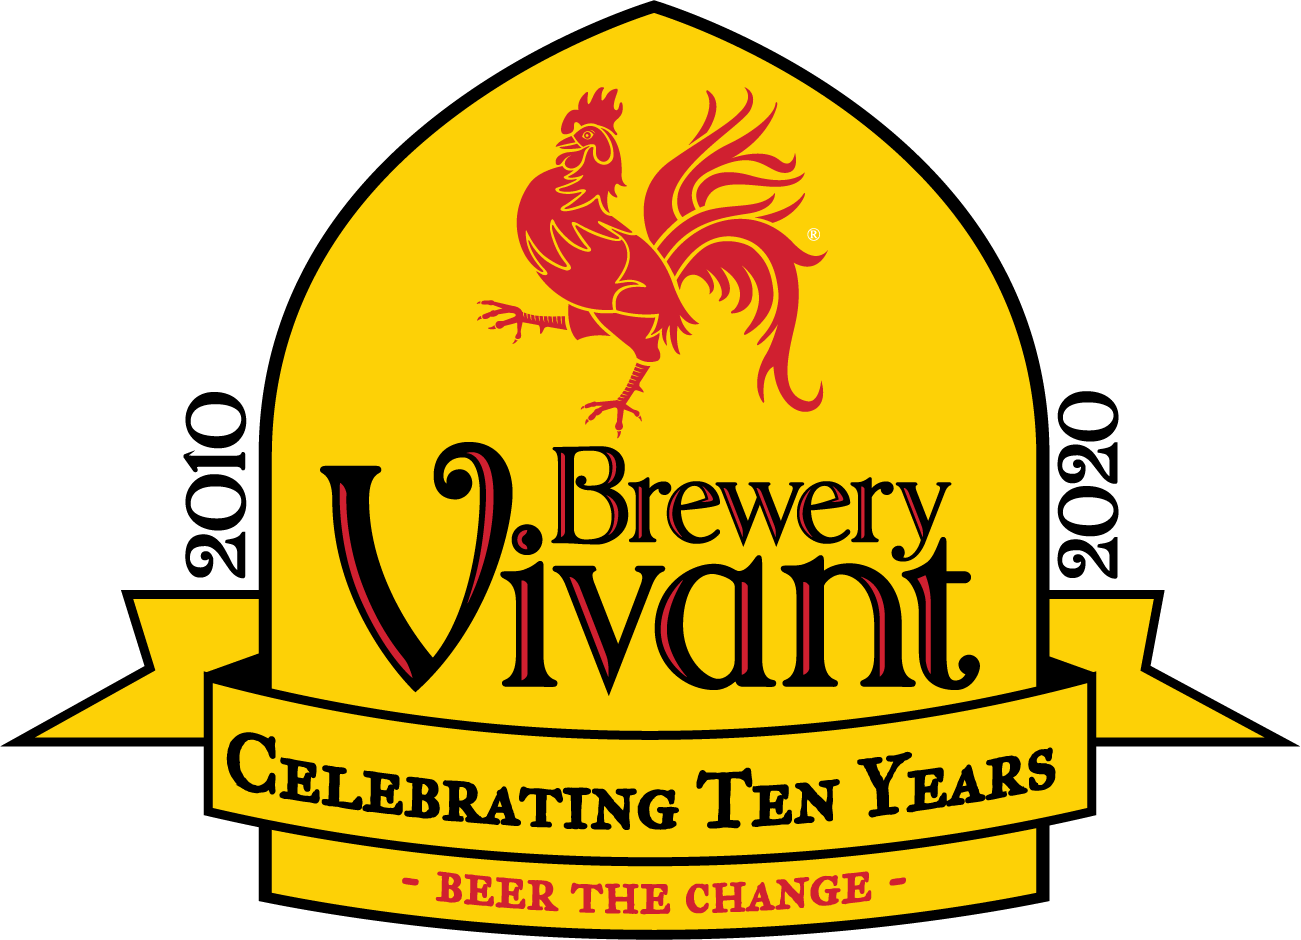 Brewery Vivant celebrates 10-year anniversary with release of J’aison Ale